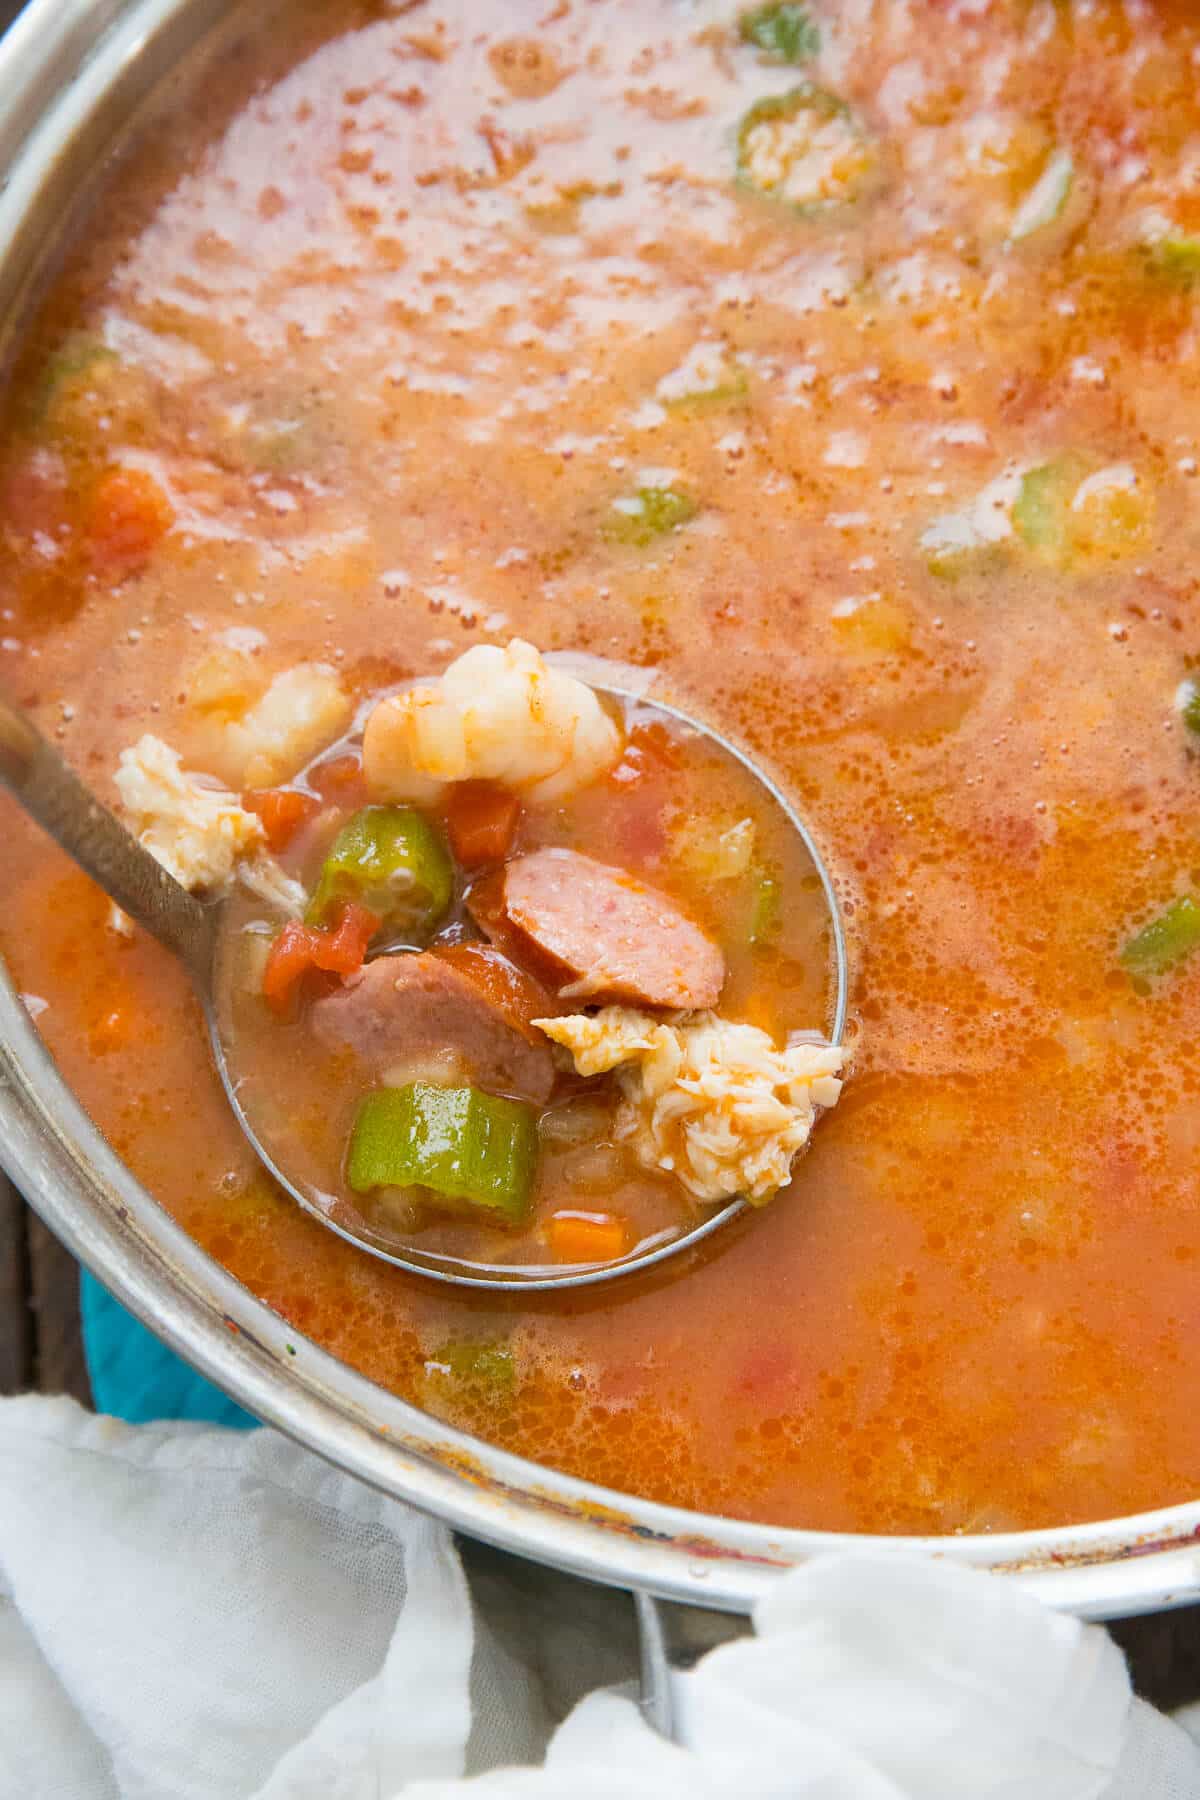 This easy gumbo recipe is a real brown please! Fill it with all your favorite ingredients!